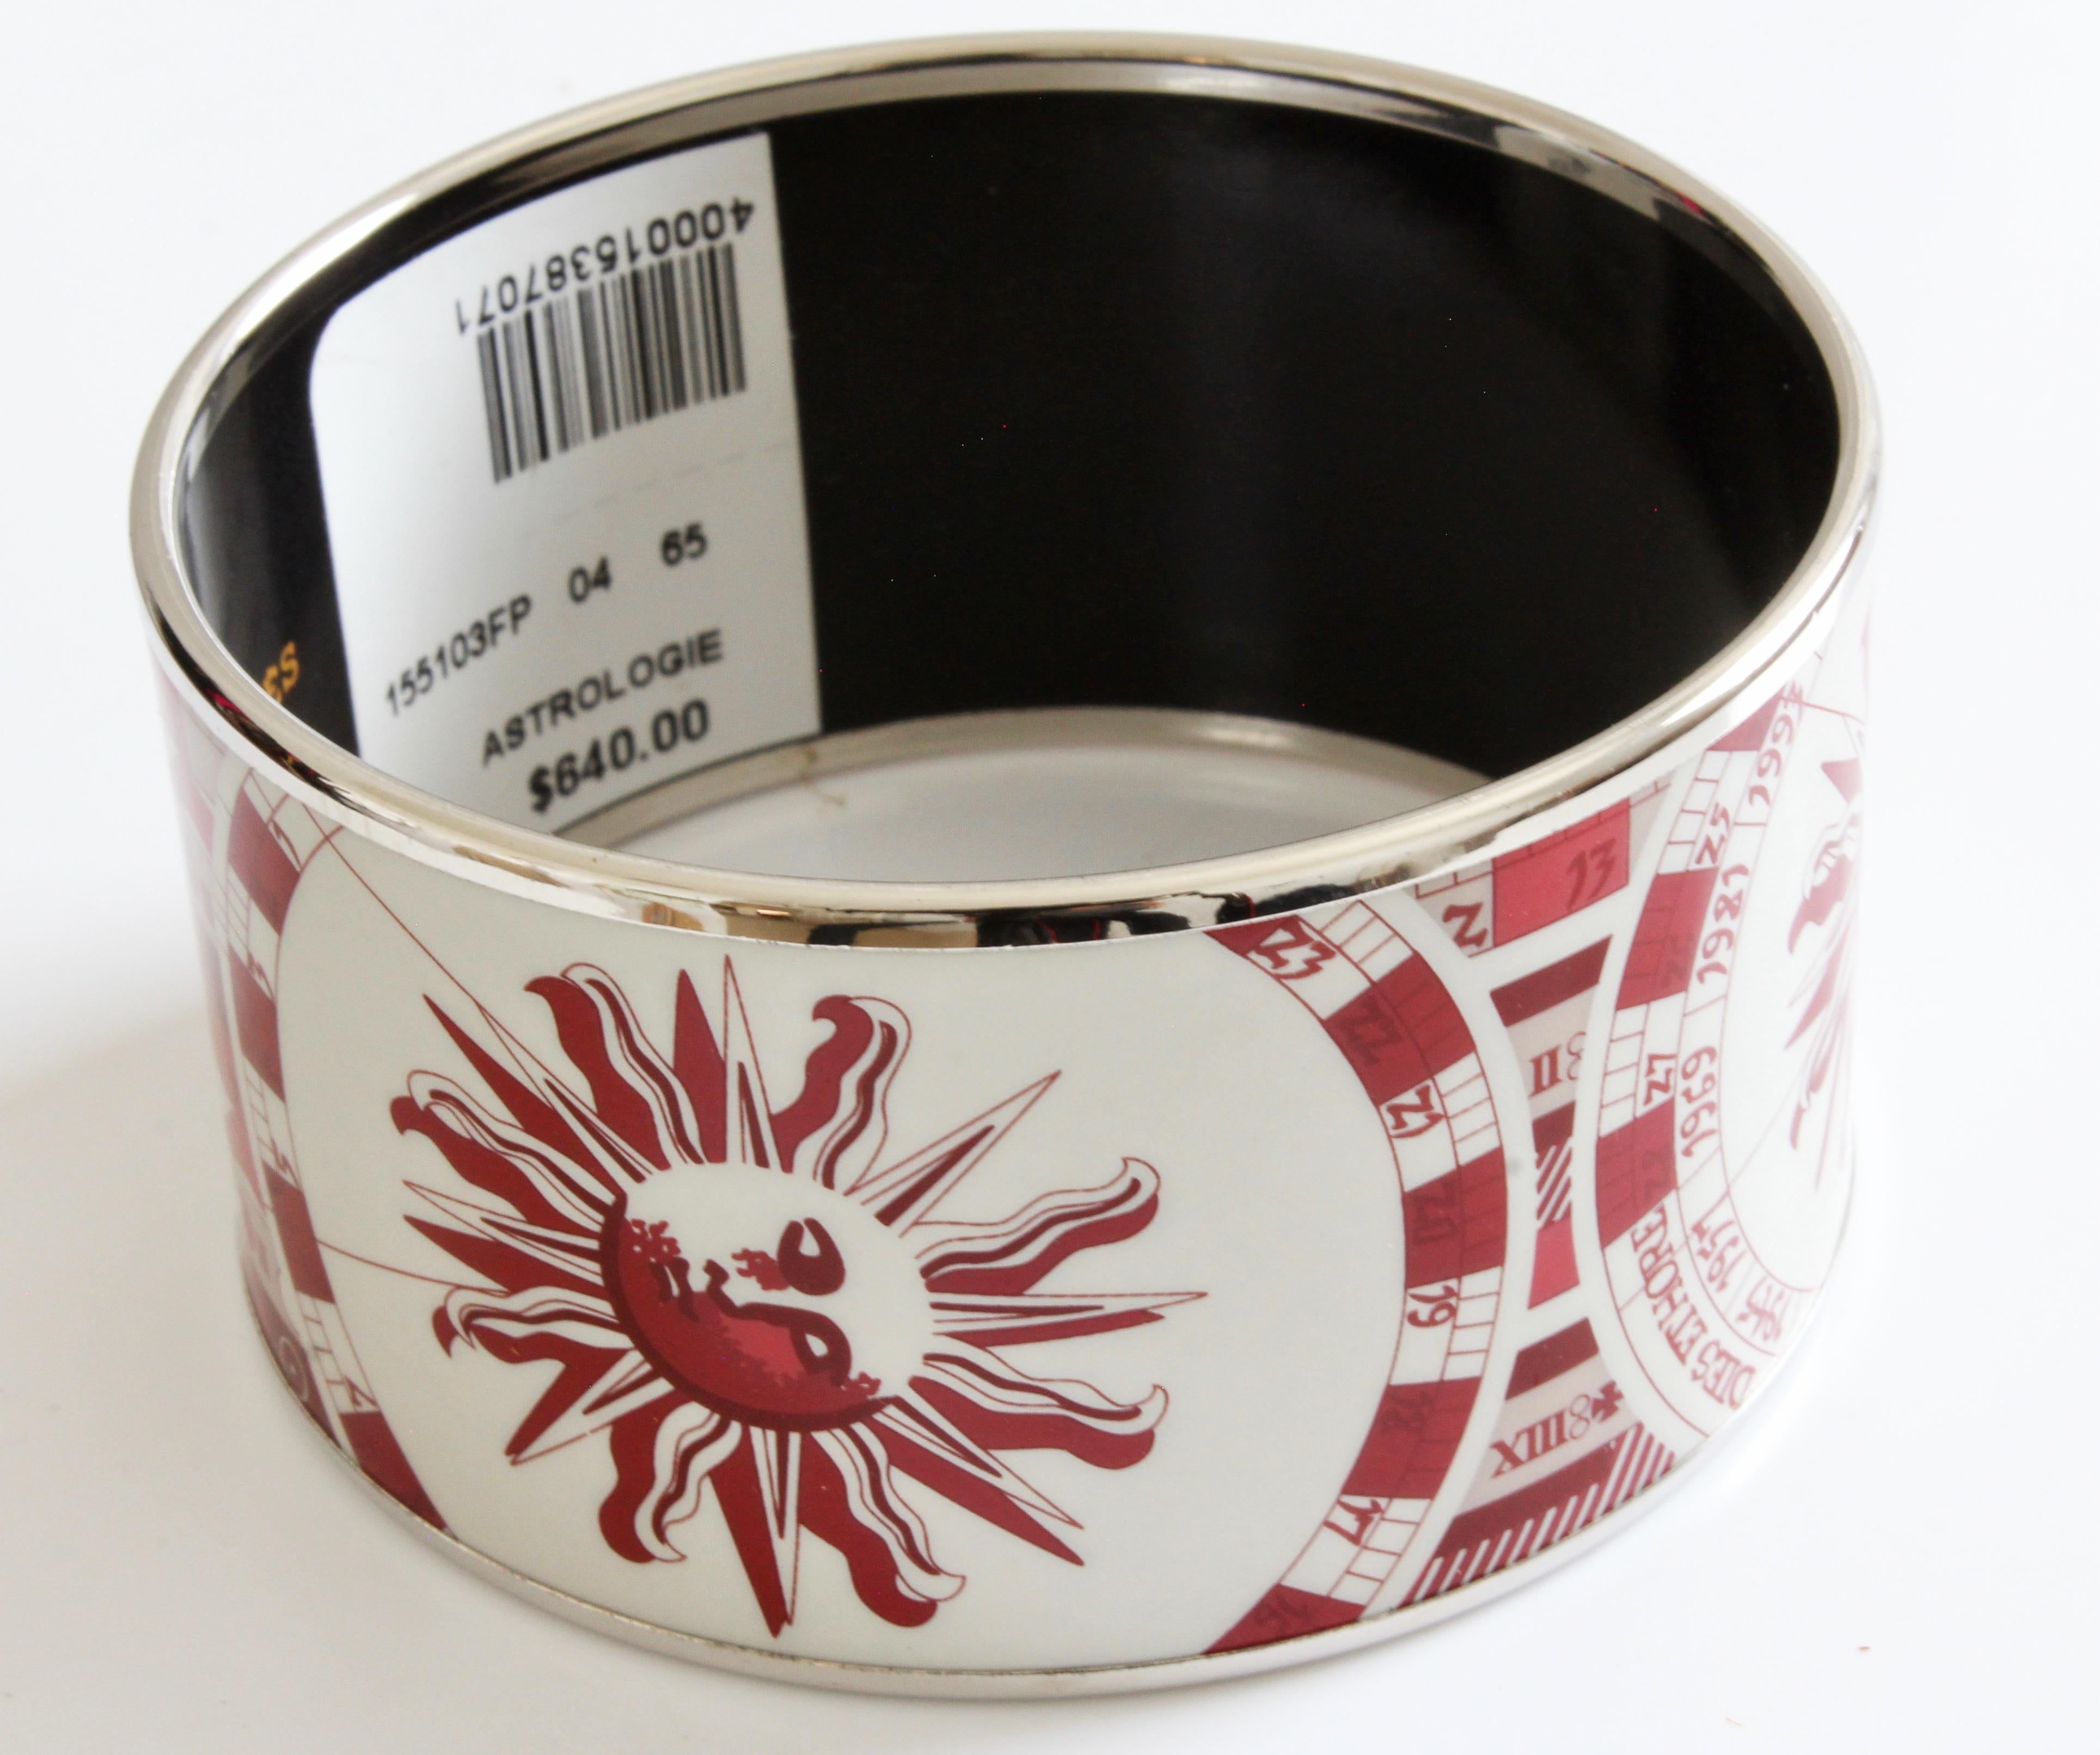 This fabulous and hard to find extra wide printed enamel bracelet was made by Hermes in 2005. Coined ASTROLOGIE, it features a large sun with zodiac calendar in red and white with silver trim. No longer in production and so hard to find, especially